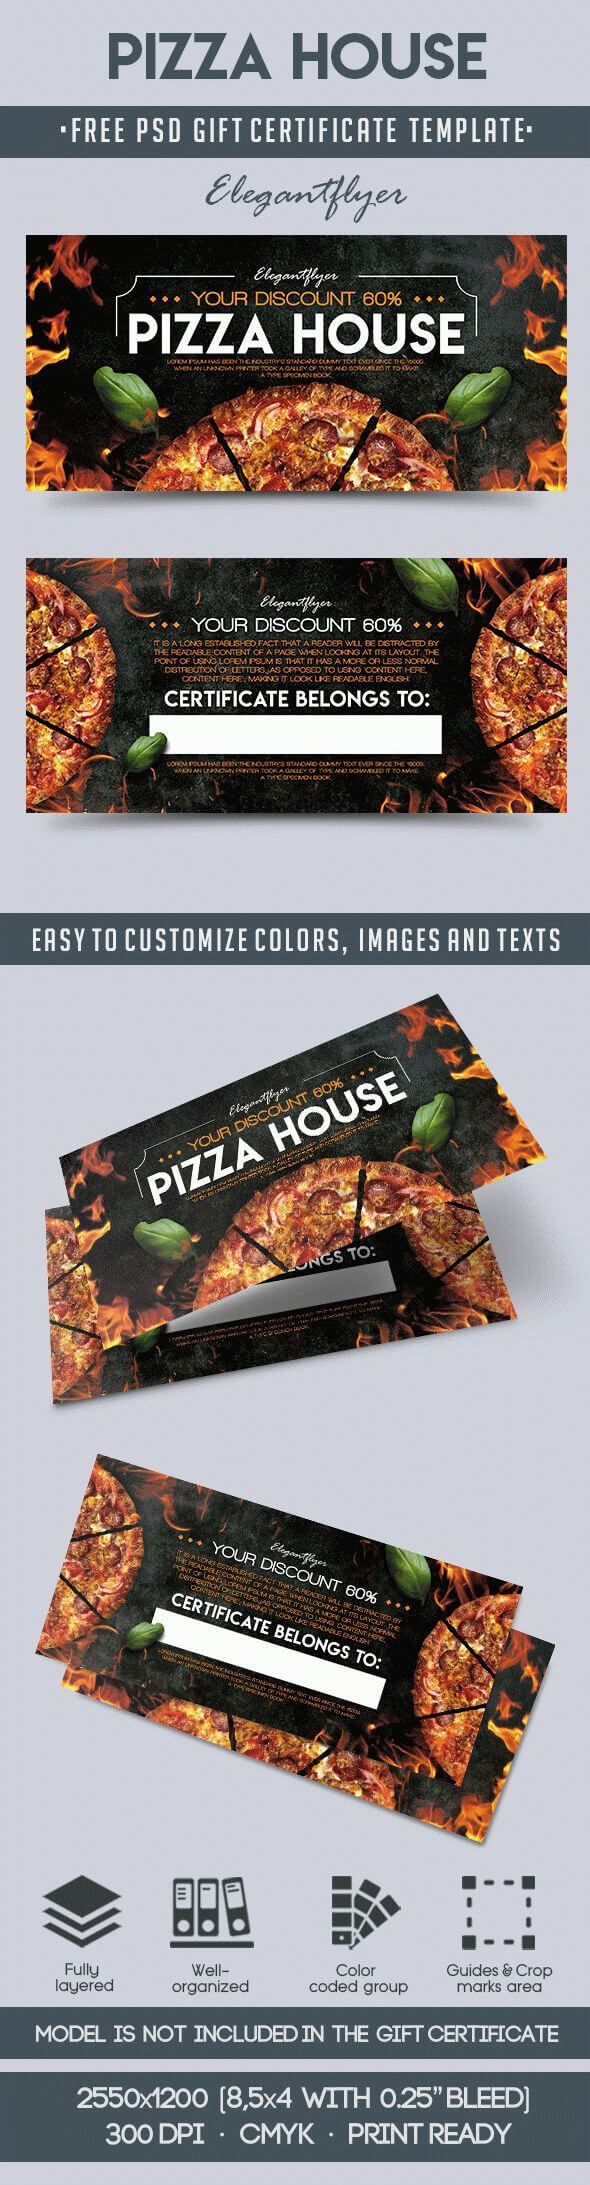 Pizza House – Free Gift Certificate Psd Template | Free Gift Pertaining To Pizza Gift Certificate Template